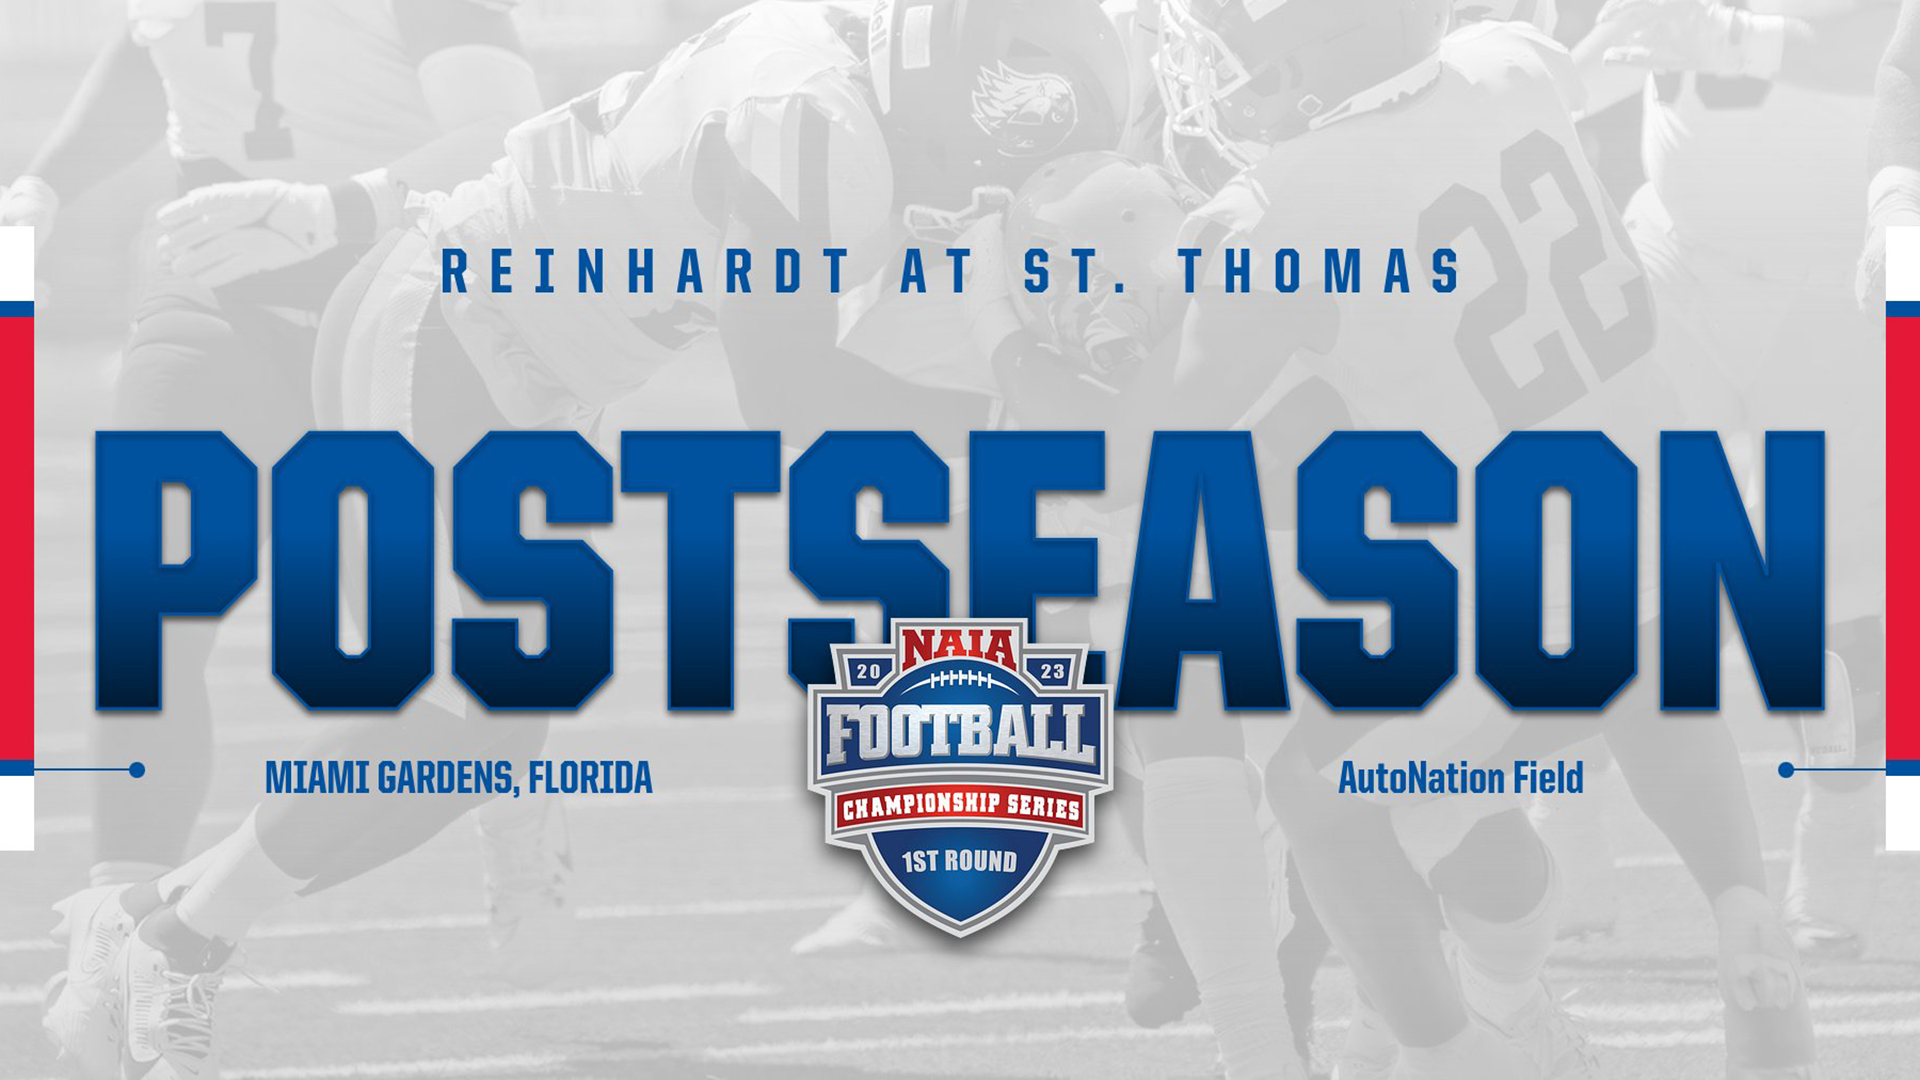 Reinhardt to Represent the AAC in the NAIA Football Championship Series